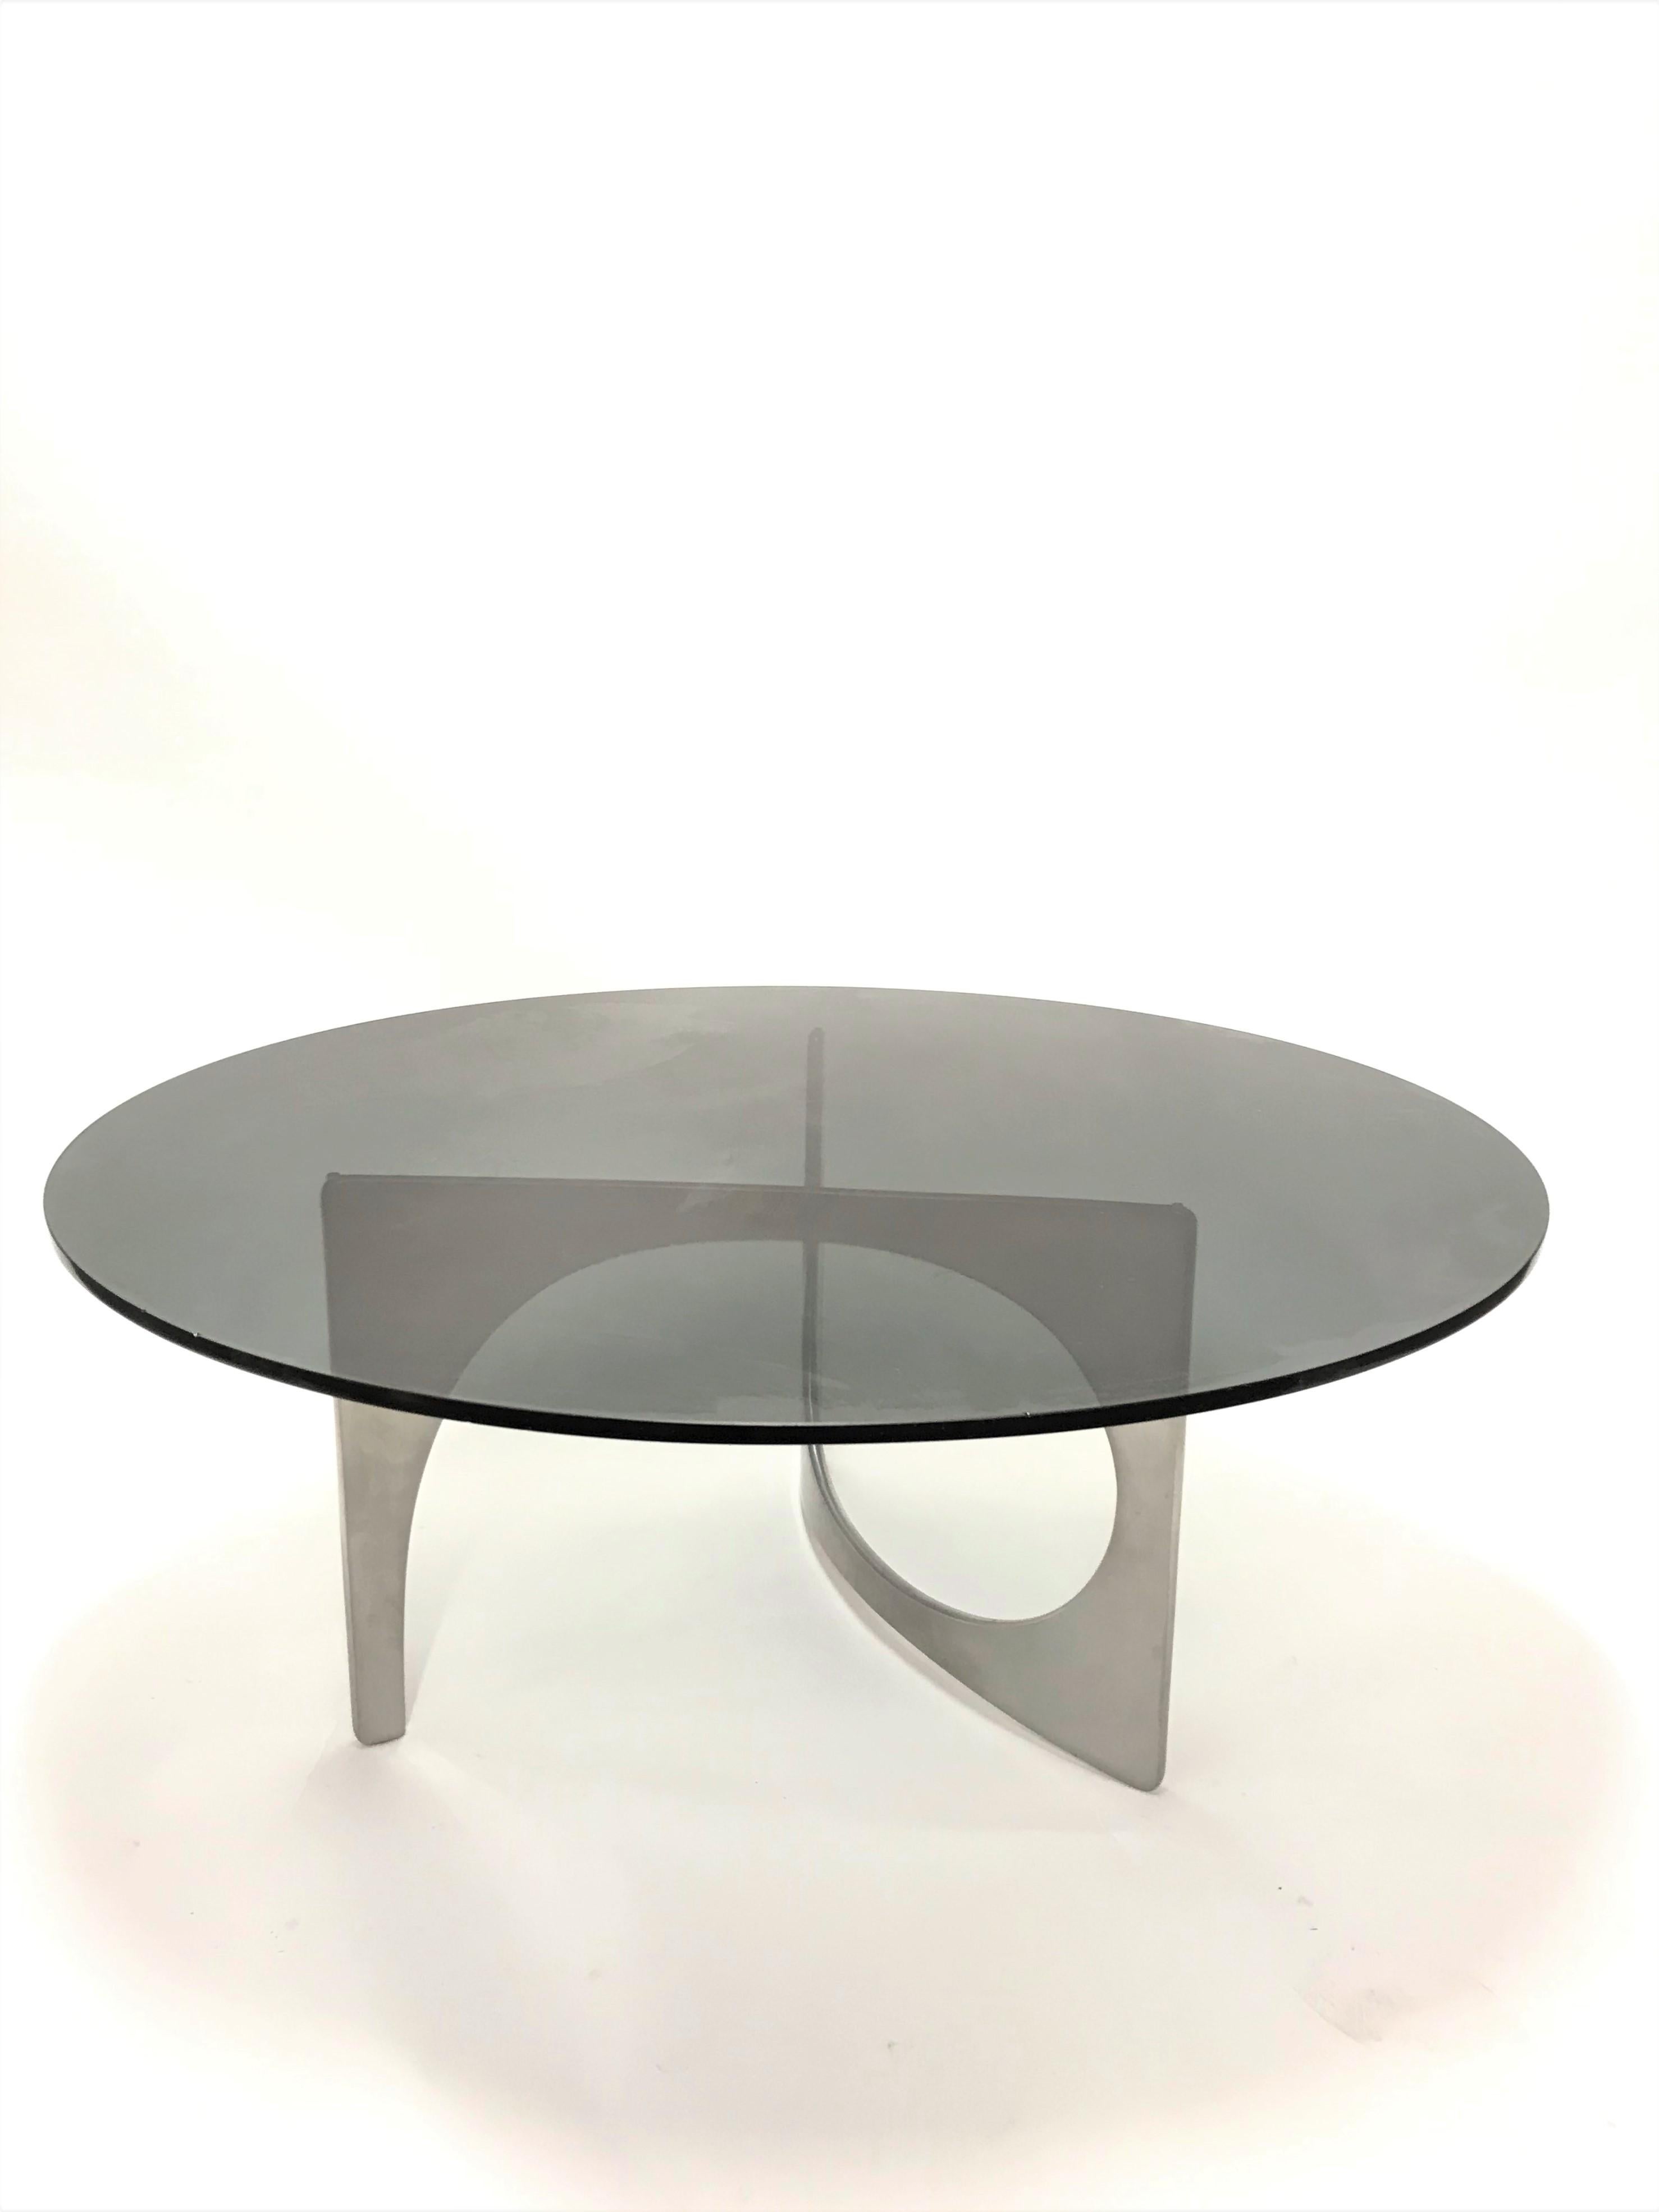 Aluminum Vintage Sculptural Coffee Table by Knut Hesterberg, 1960s